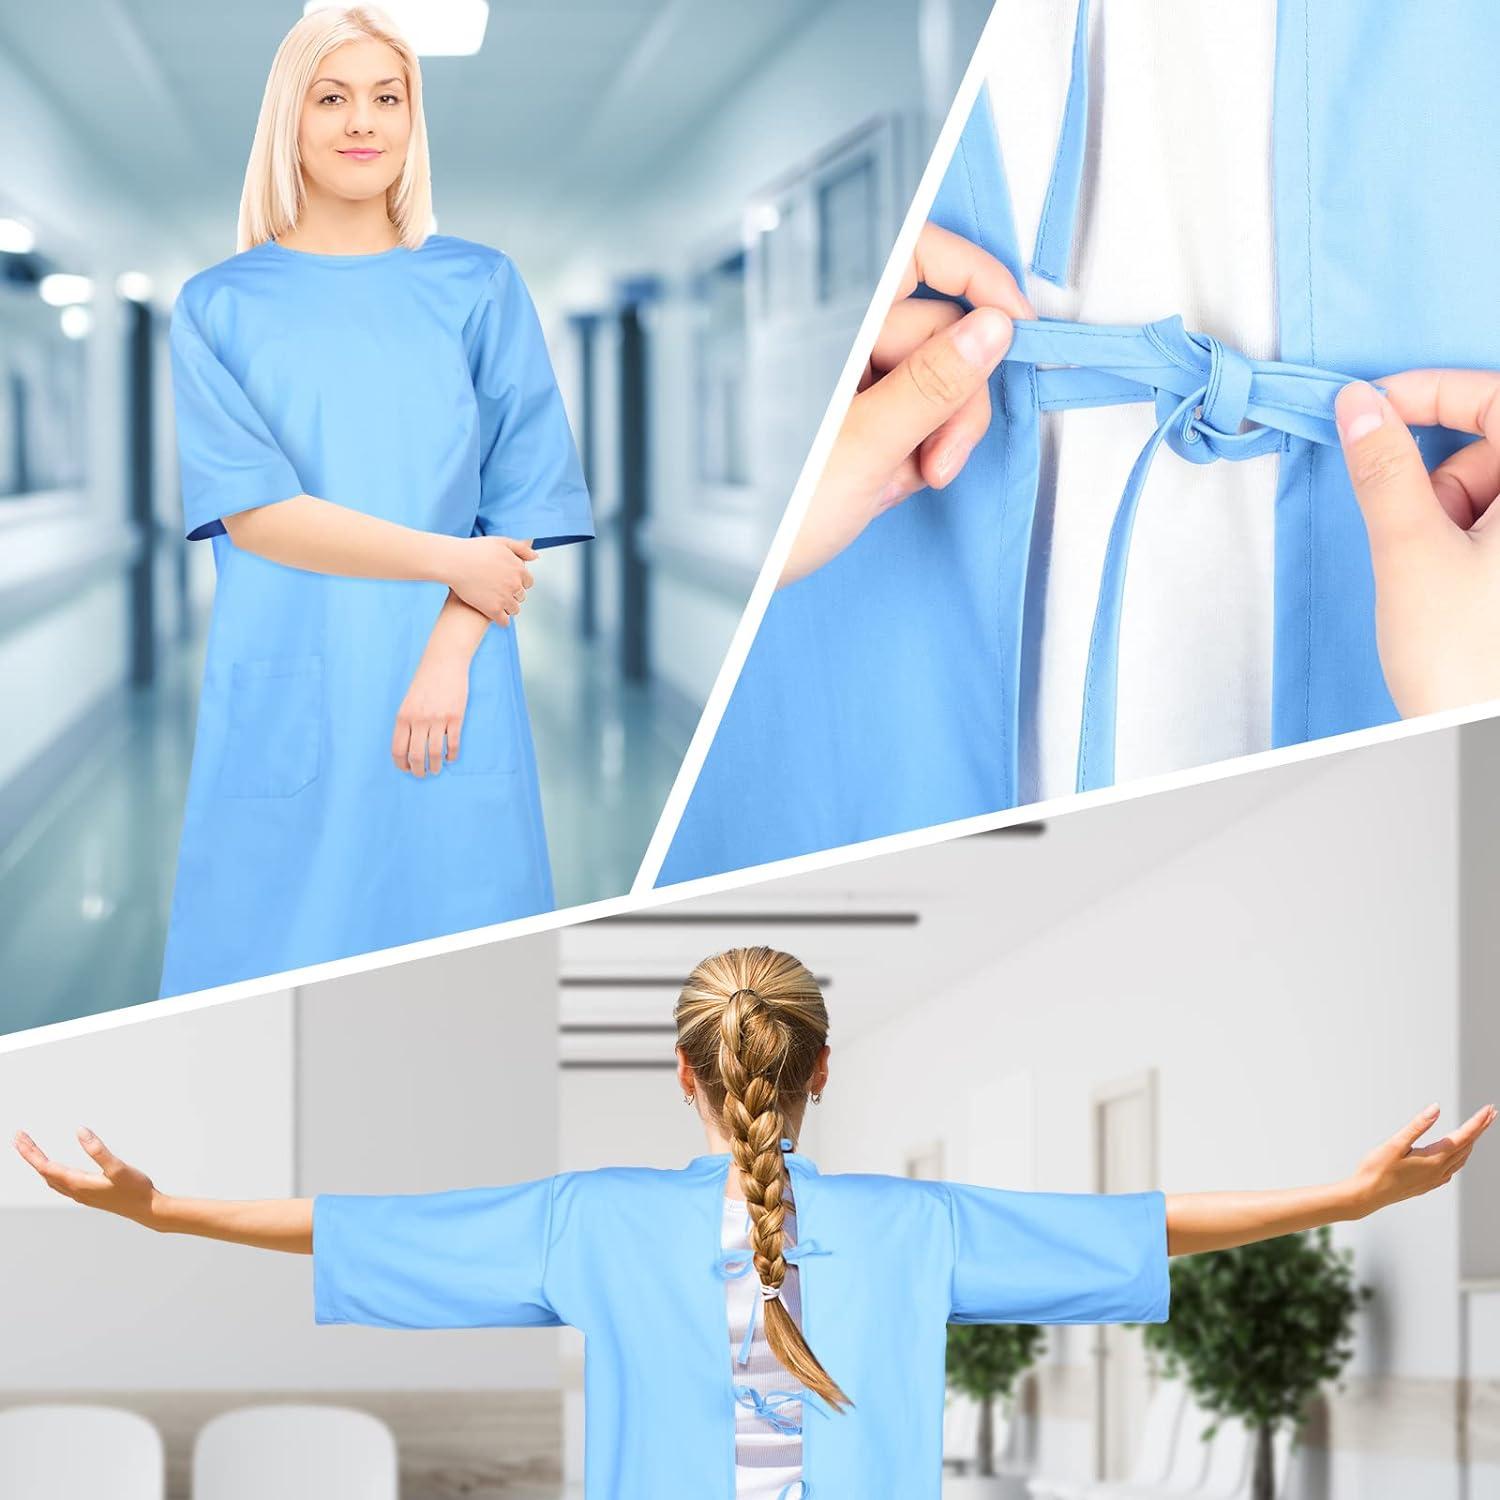 Medical Gown Woman